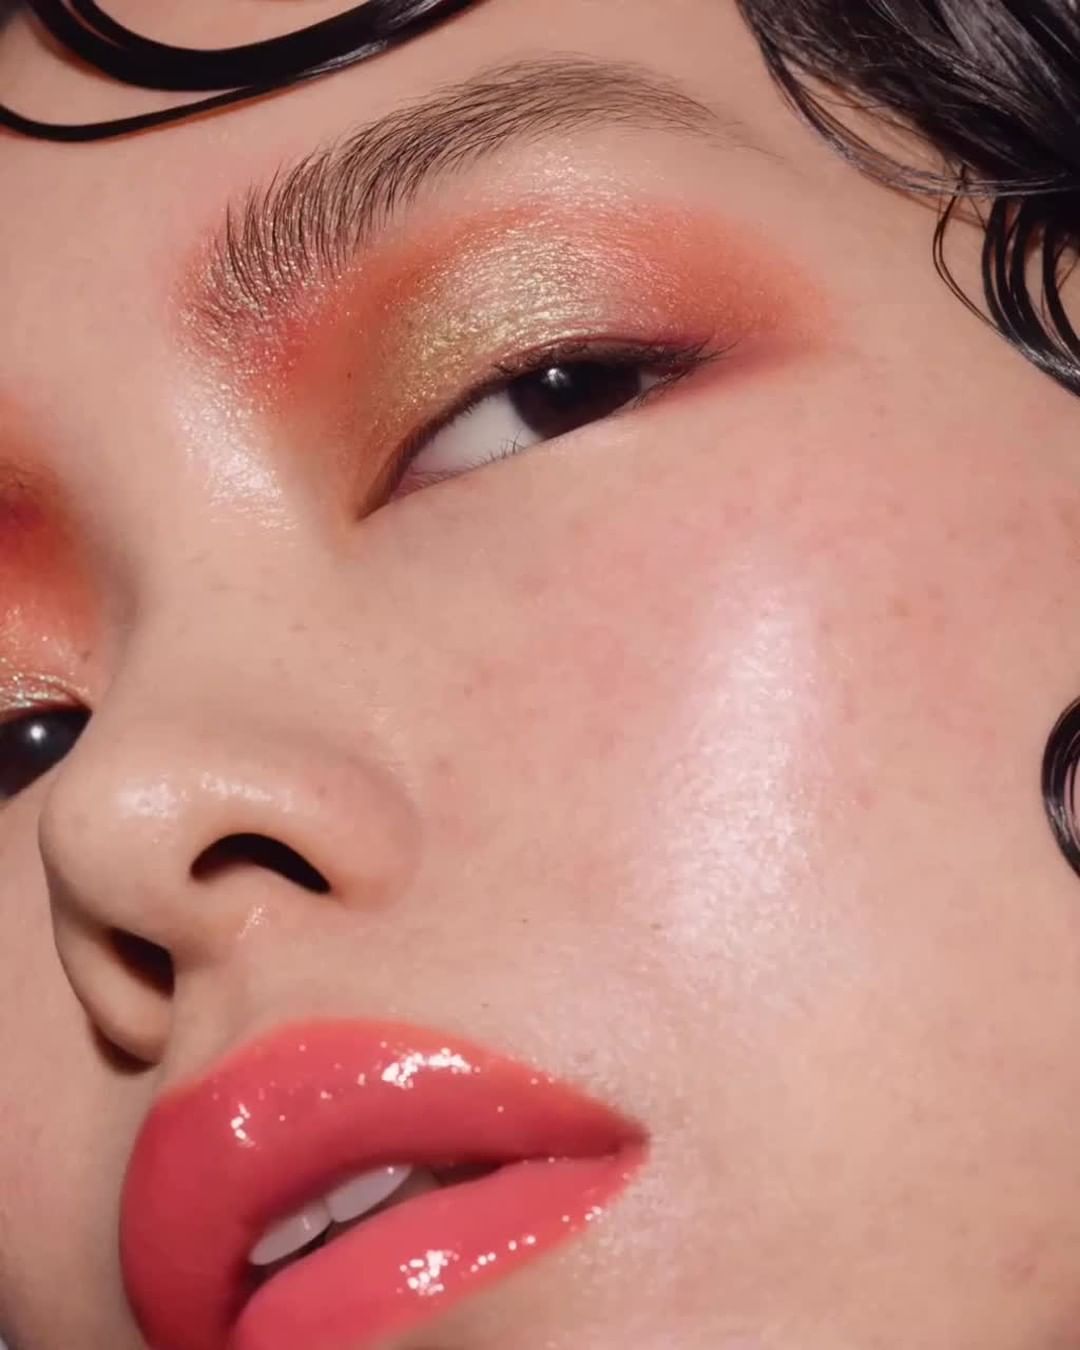 shu uemura - recreate the tokyo nightscape on your lids. 🌃 atelier makeup artist kimura from japan used the new signature “tokyo nightscape” prismatic pressed eye shadow on mutsue’s eyes. @kimurajunic...